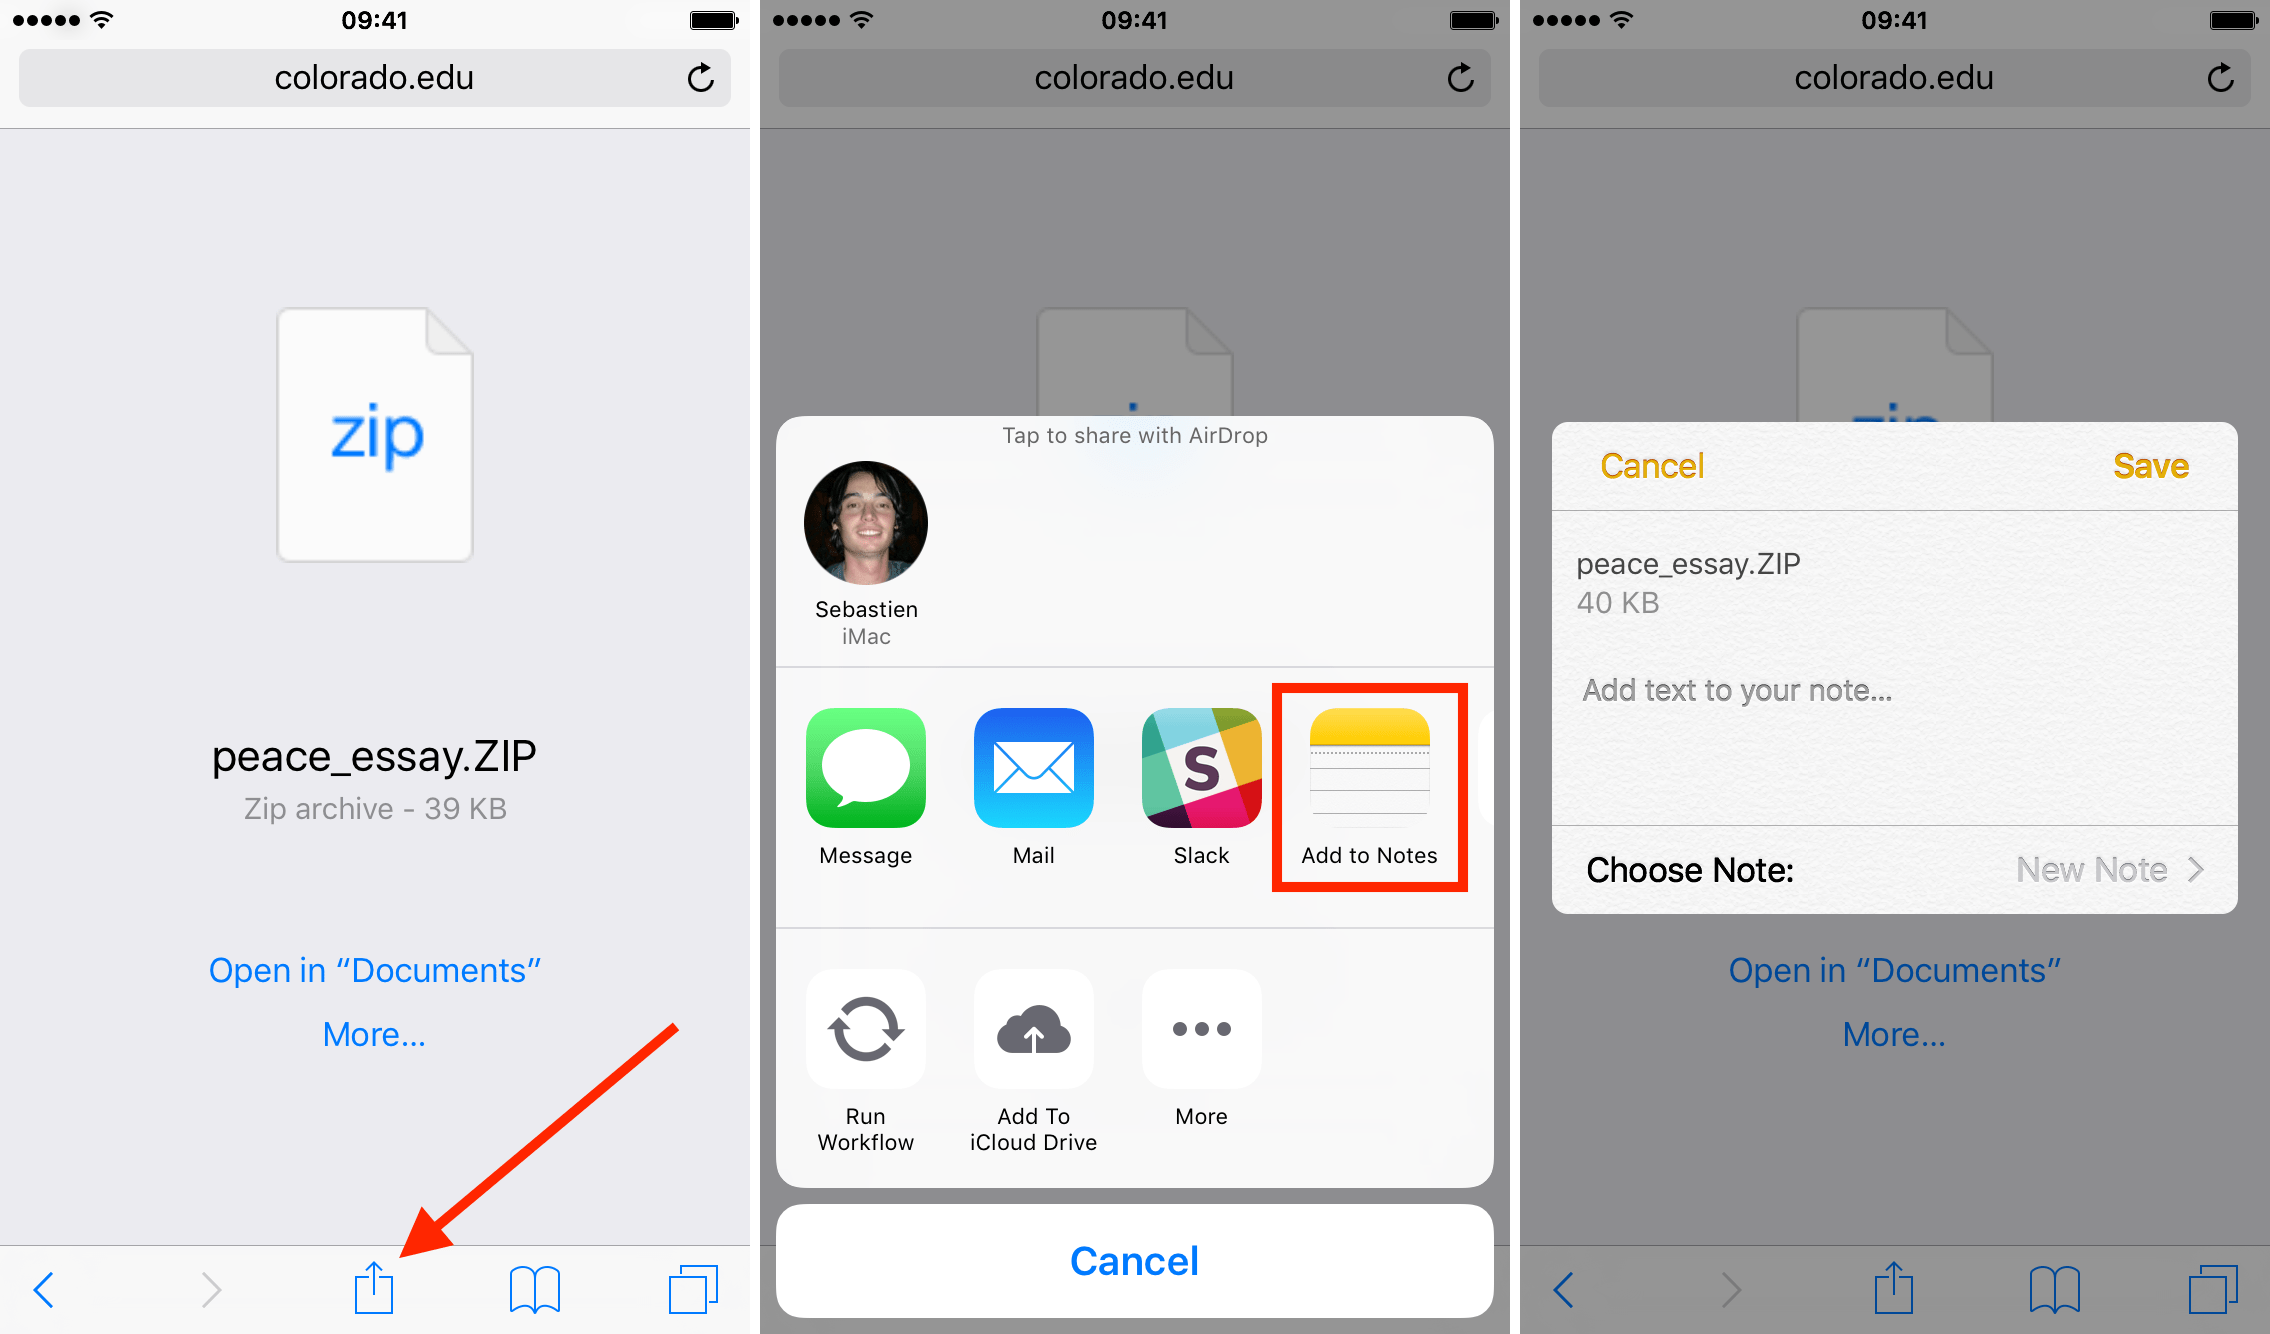 Send a zip file to the Notes app